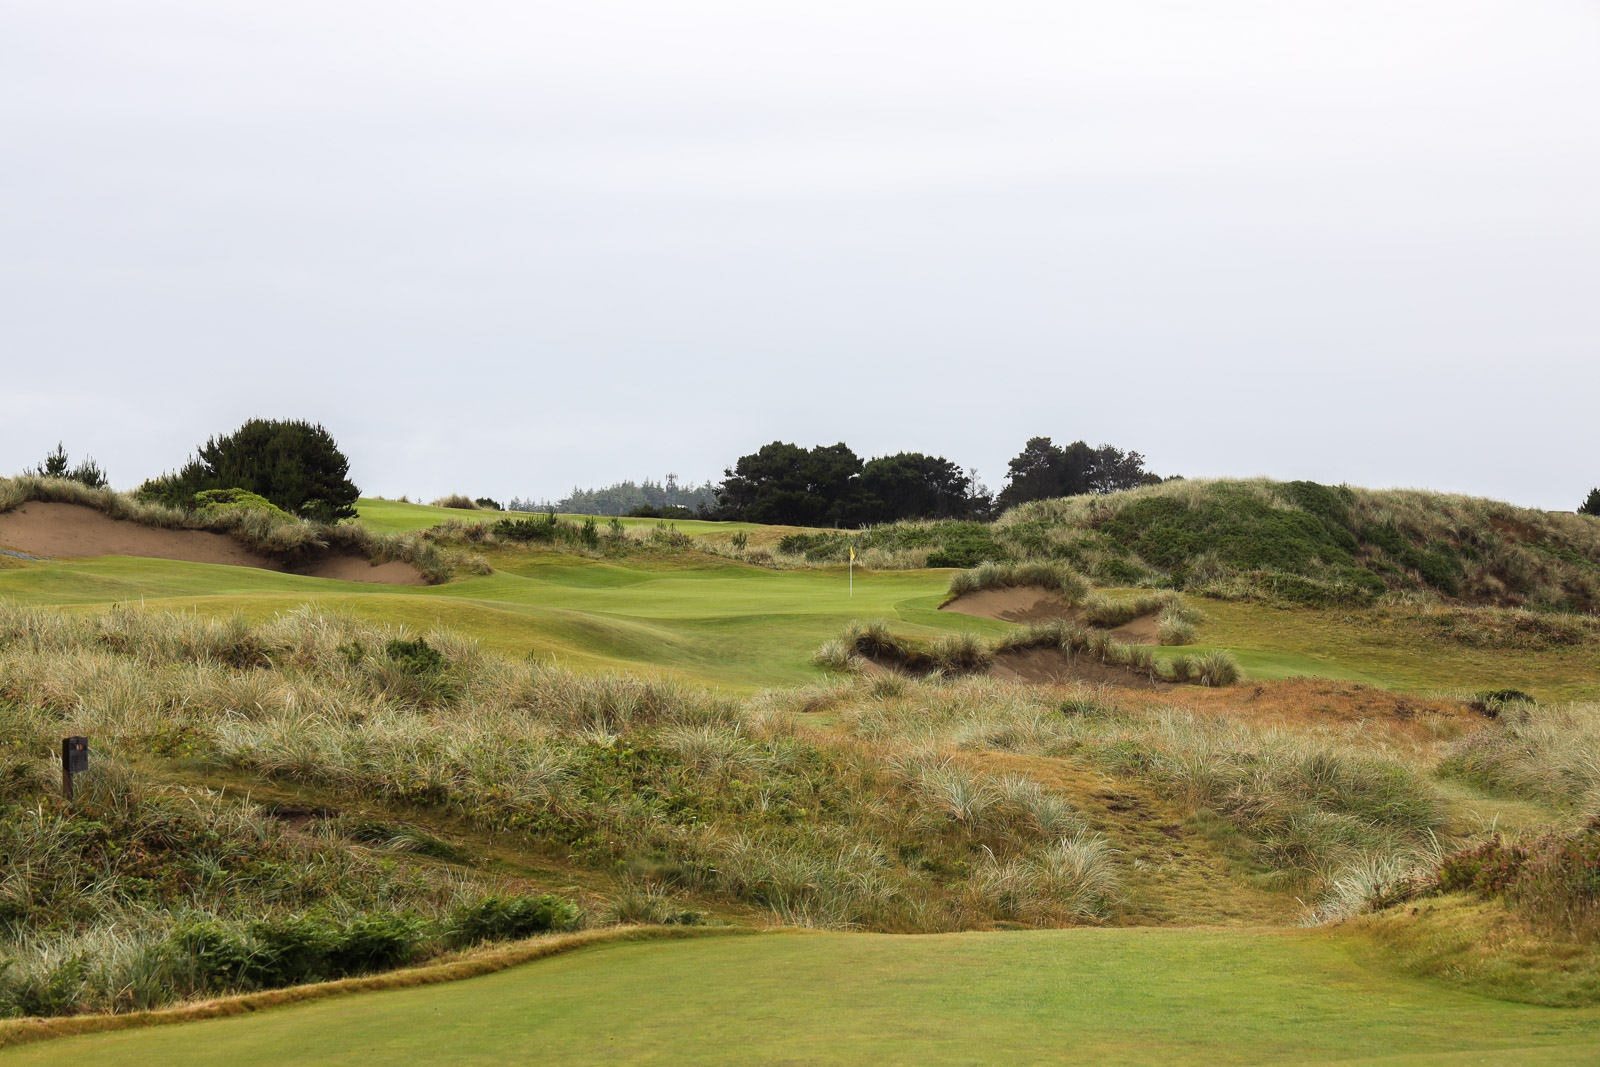 The 5th hole at Pacific Dunes.